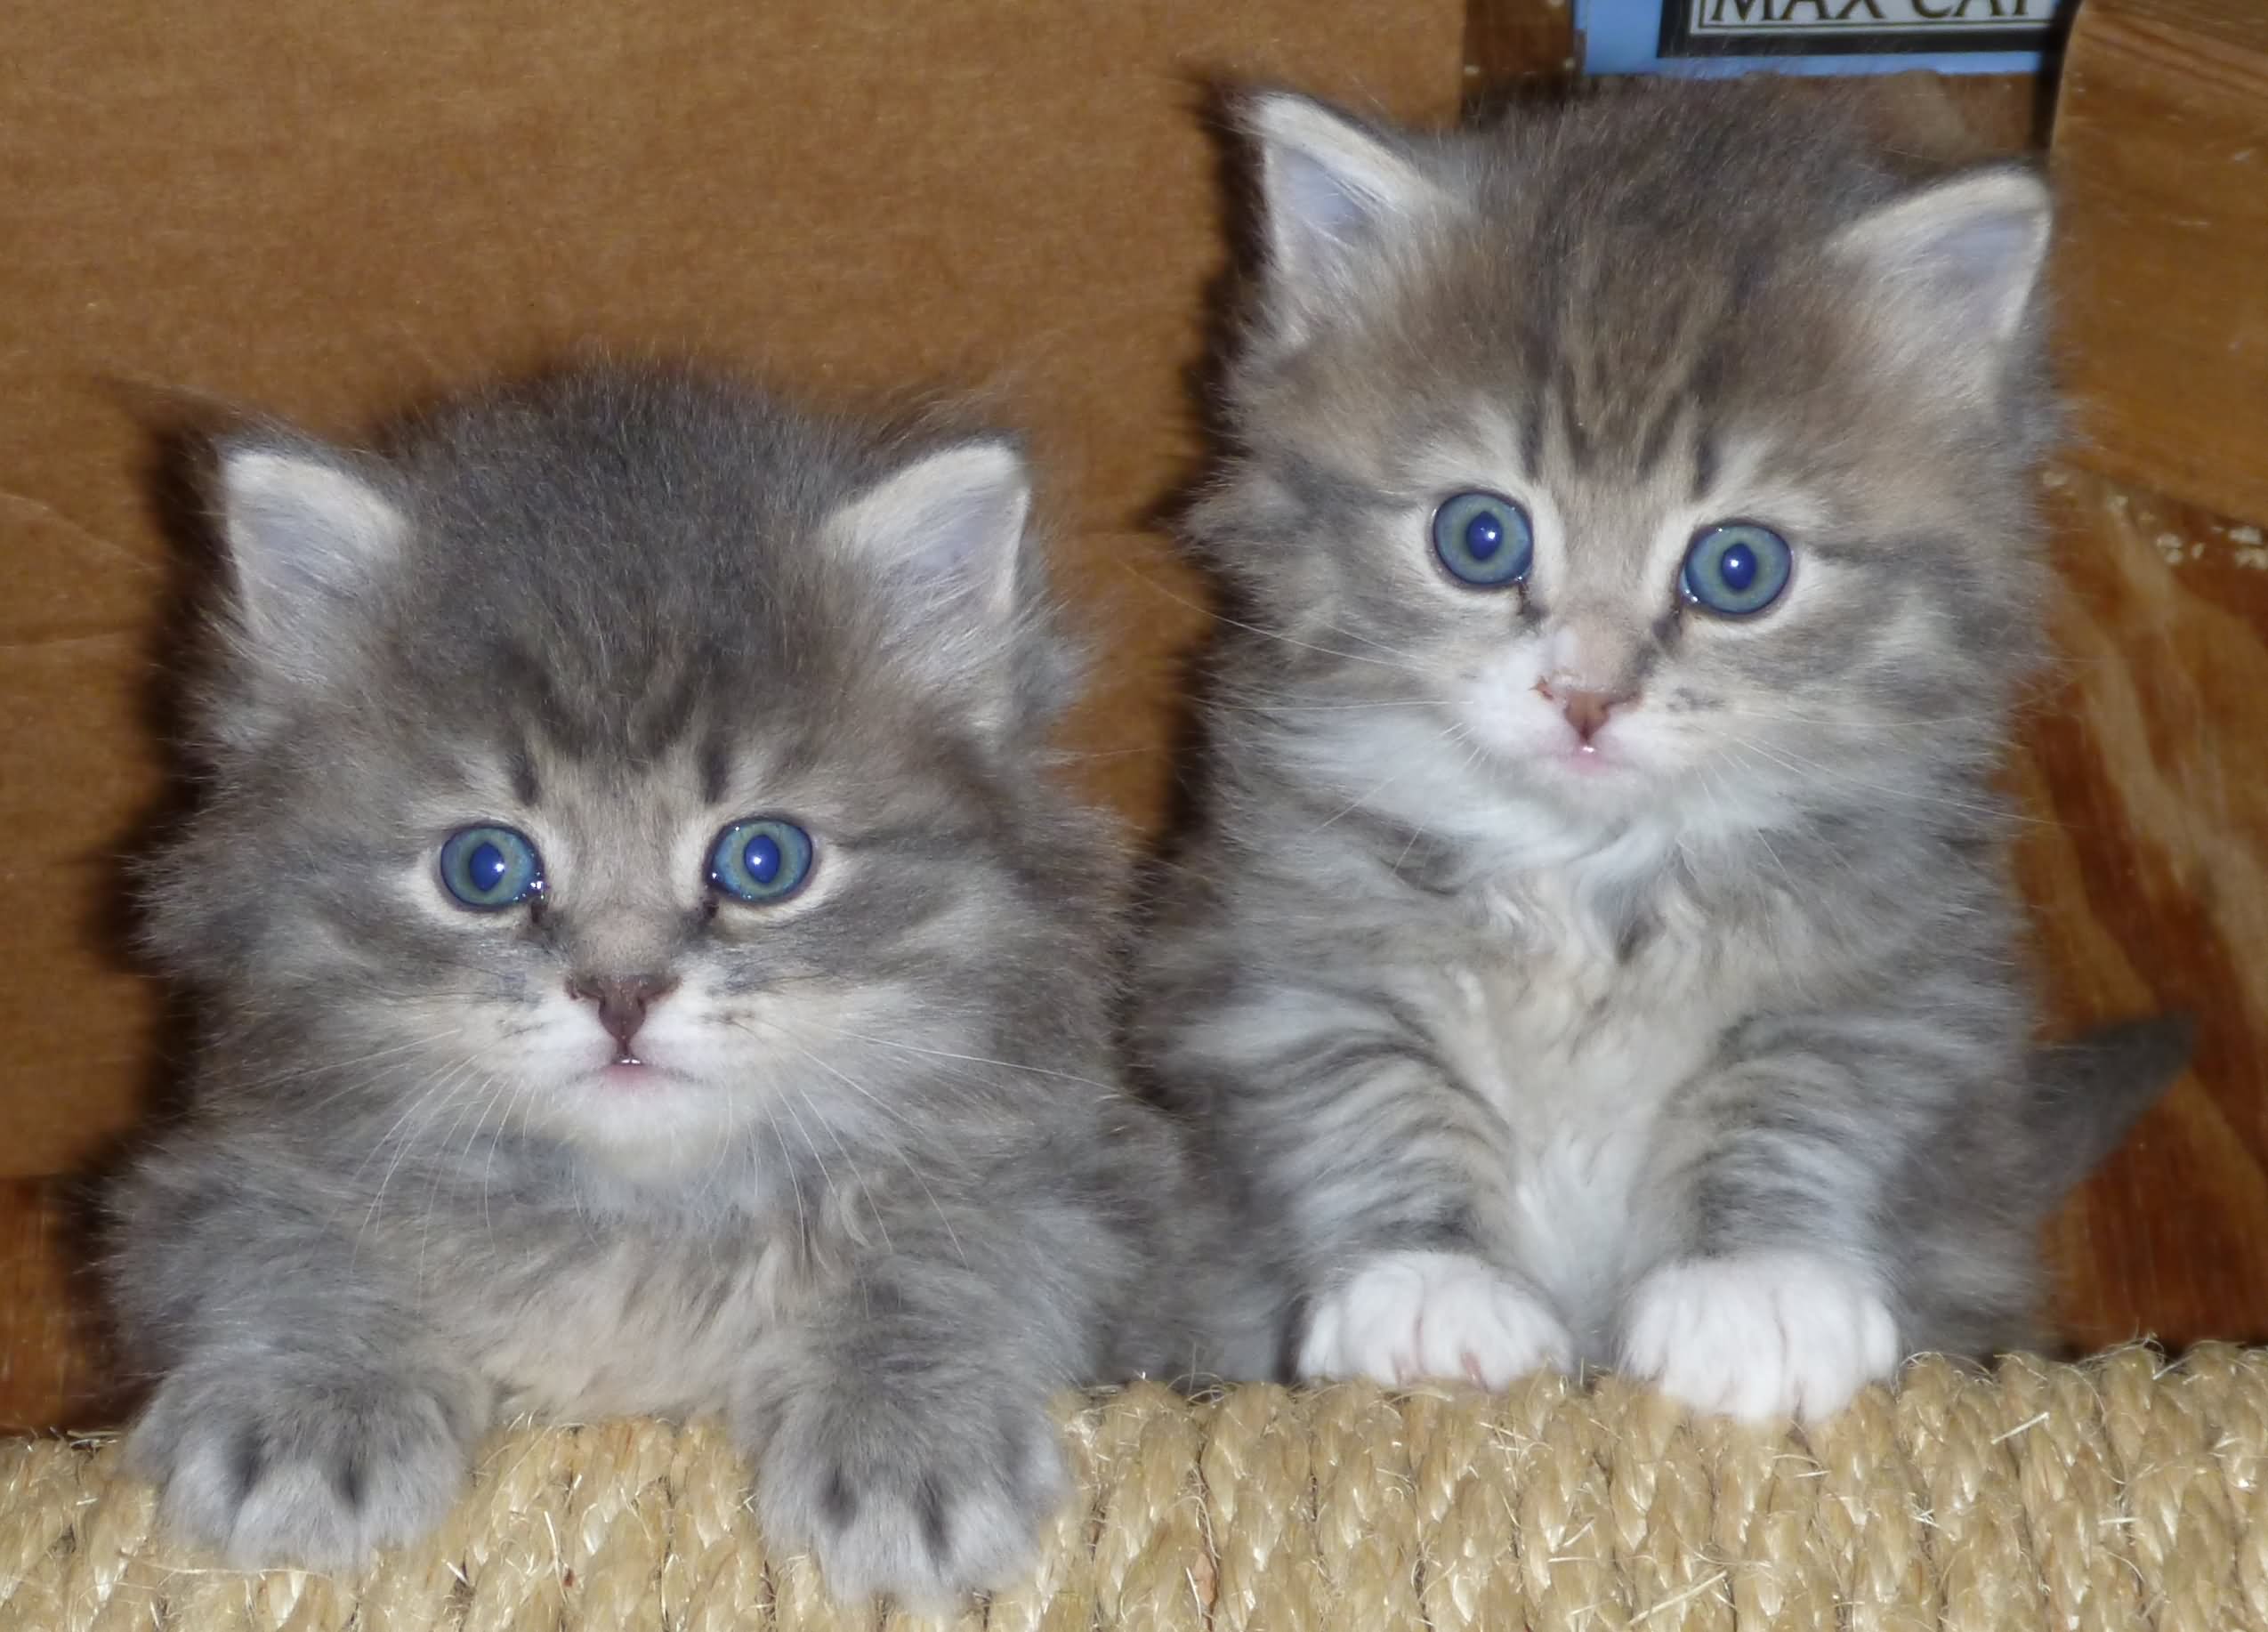 What are some facts about Siberian kittens?